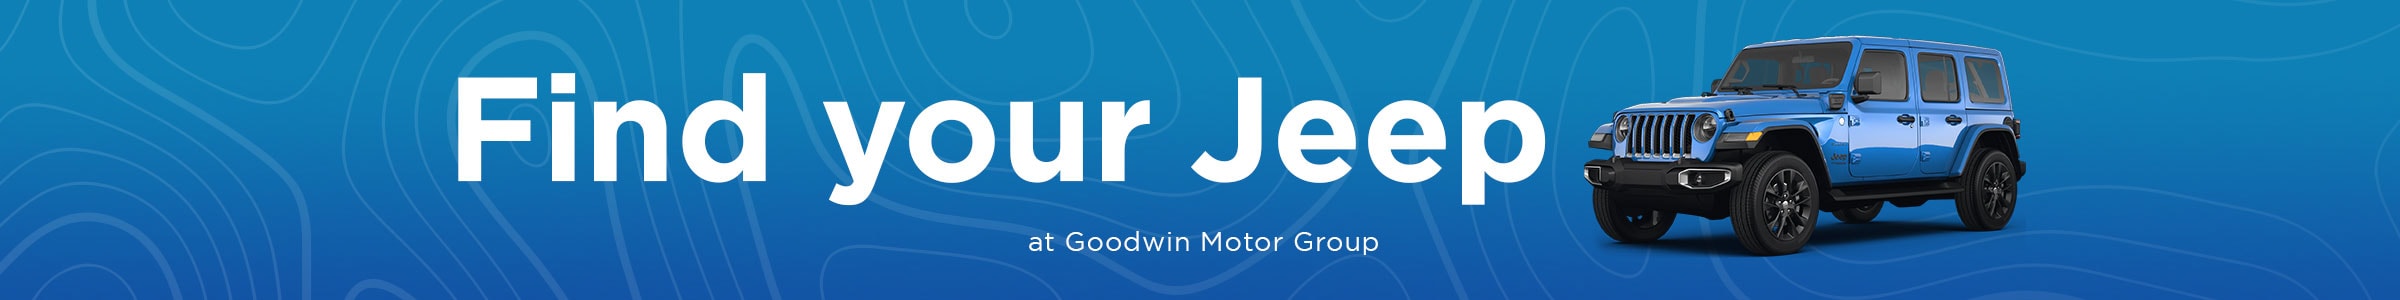 Used Jeep Inventory at Goodwin Motor Group.